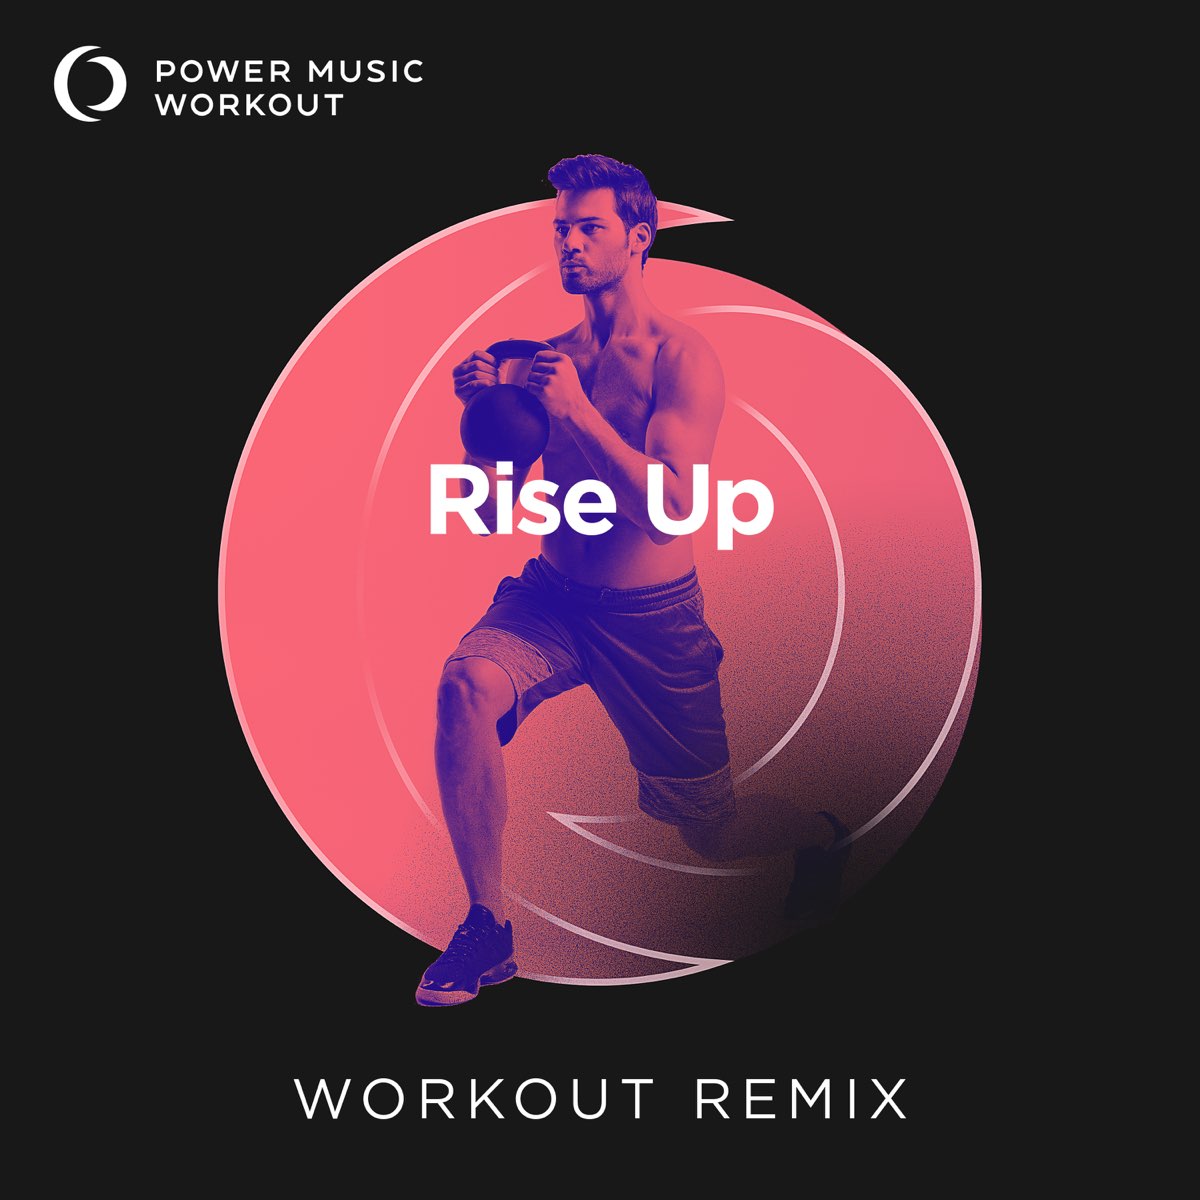 ‎Rise Up - Single by Power Music Workout on Apple Music